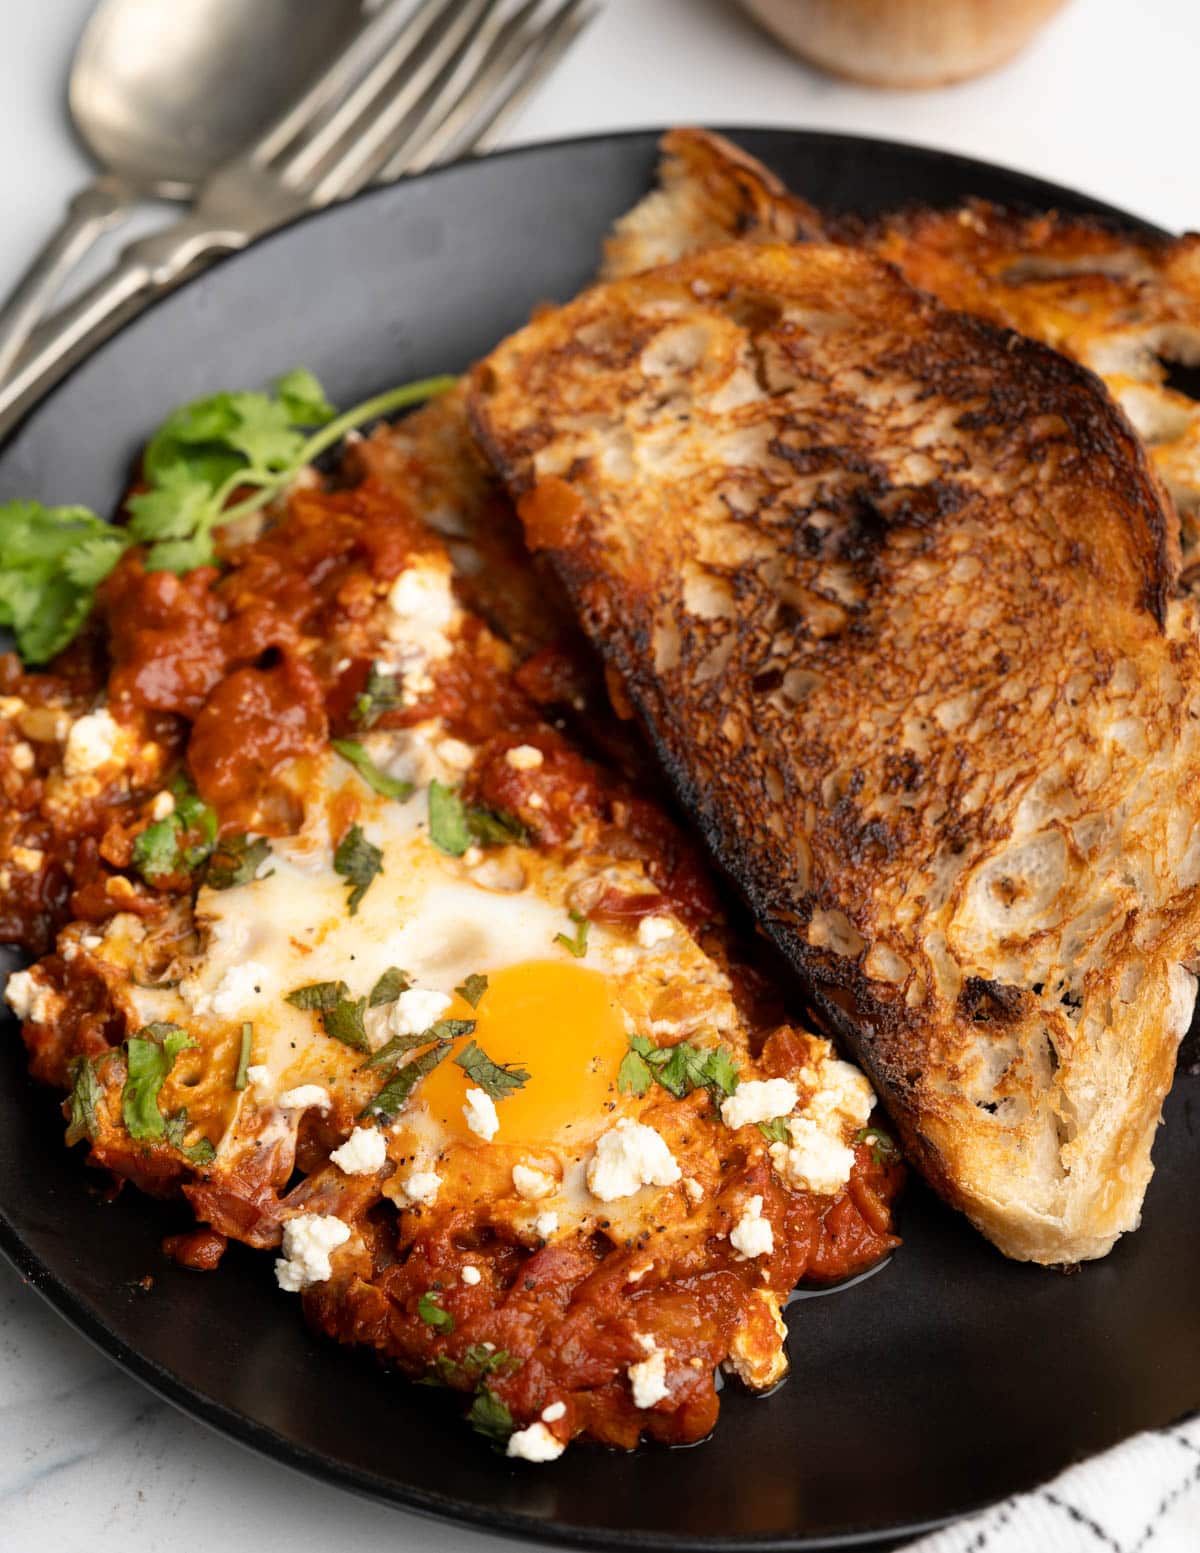 Shakshuka served with toasted sourdough bread.